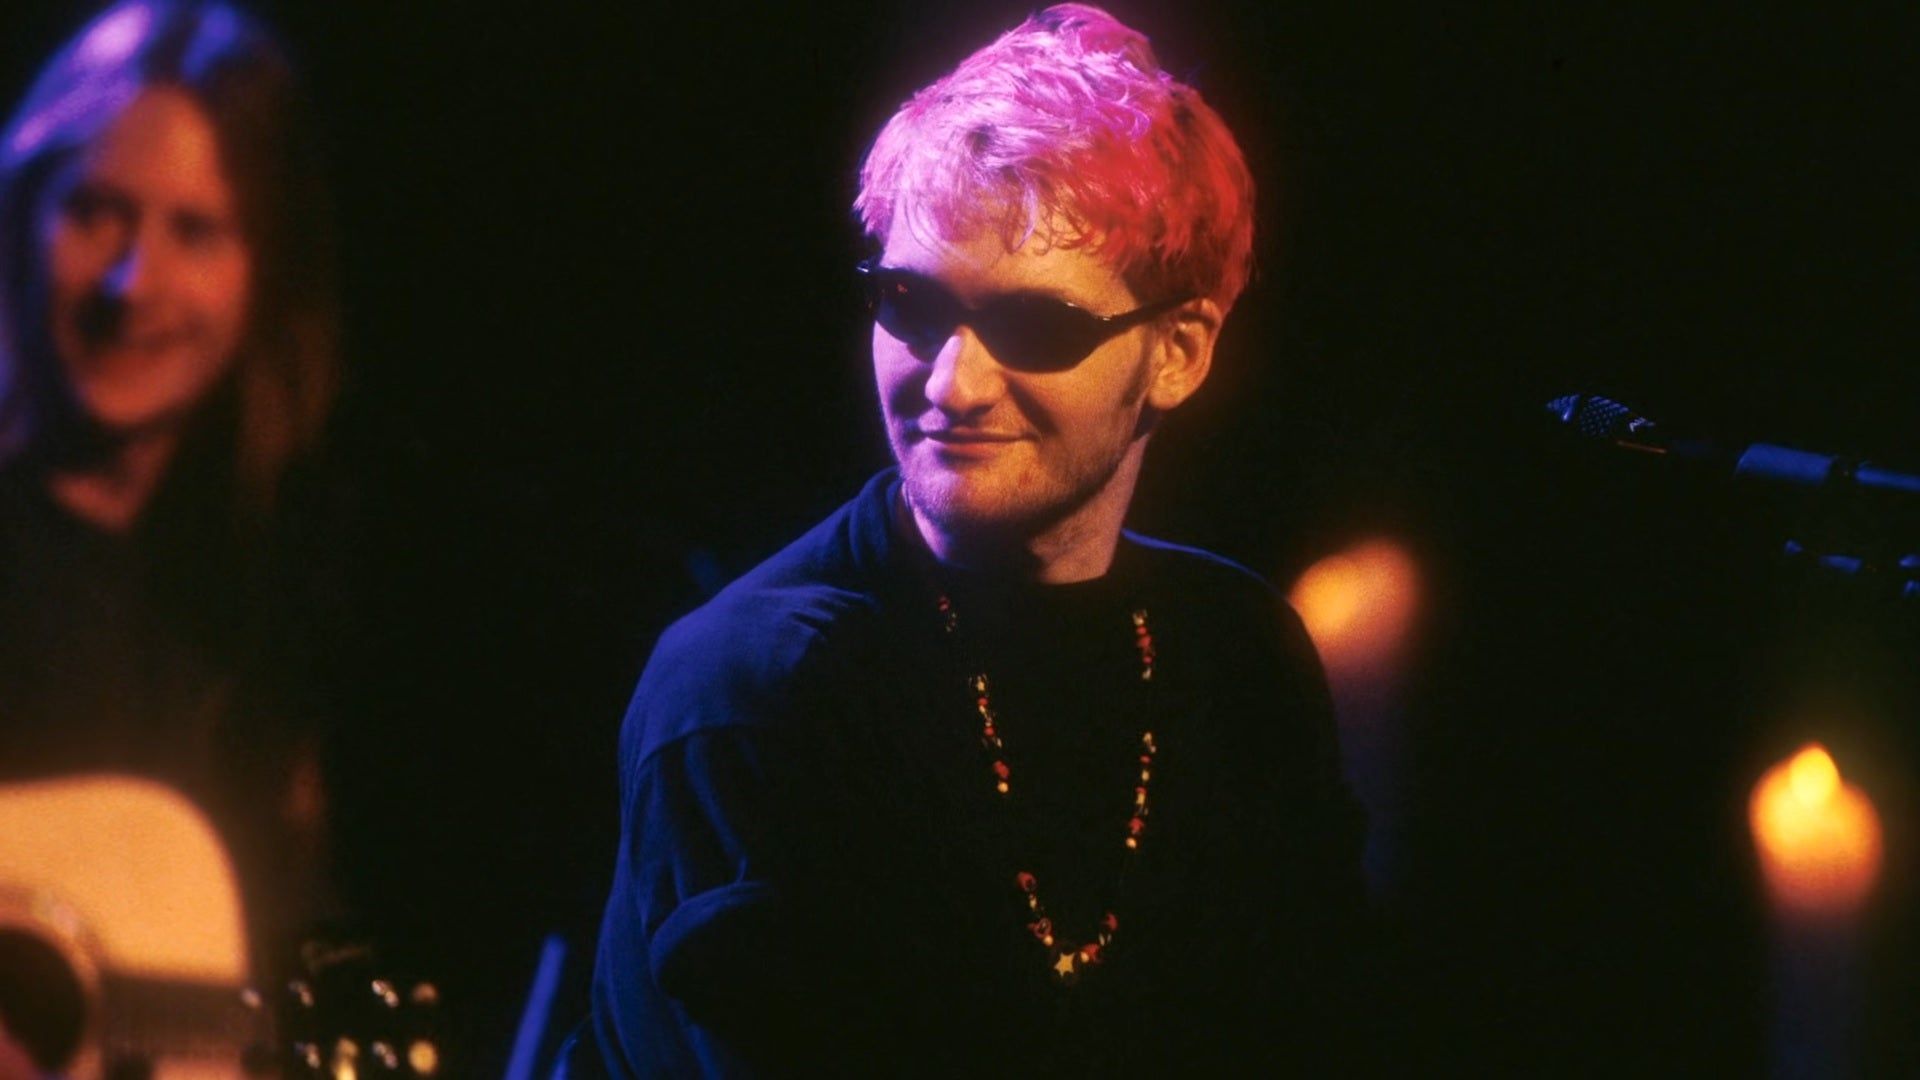 The last and heartbreaking Layne Staley (Alice In Chains) interview - Classic Rock 99.5